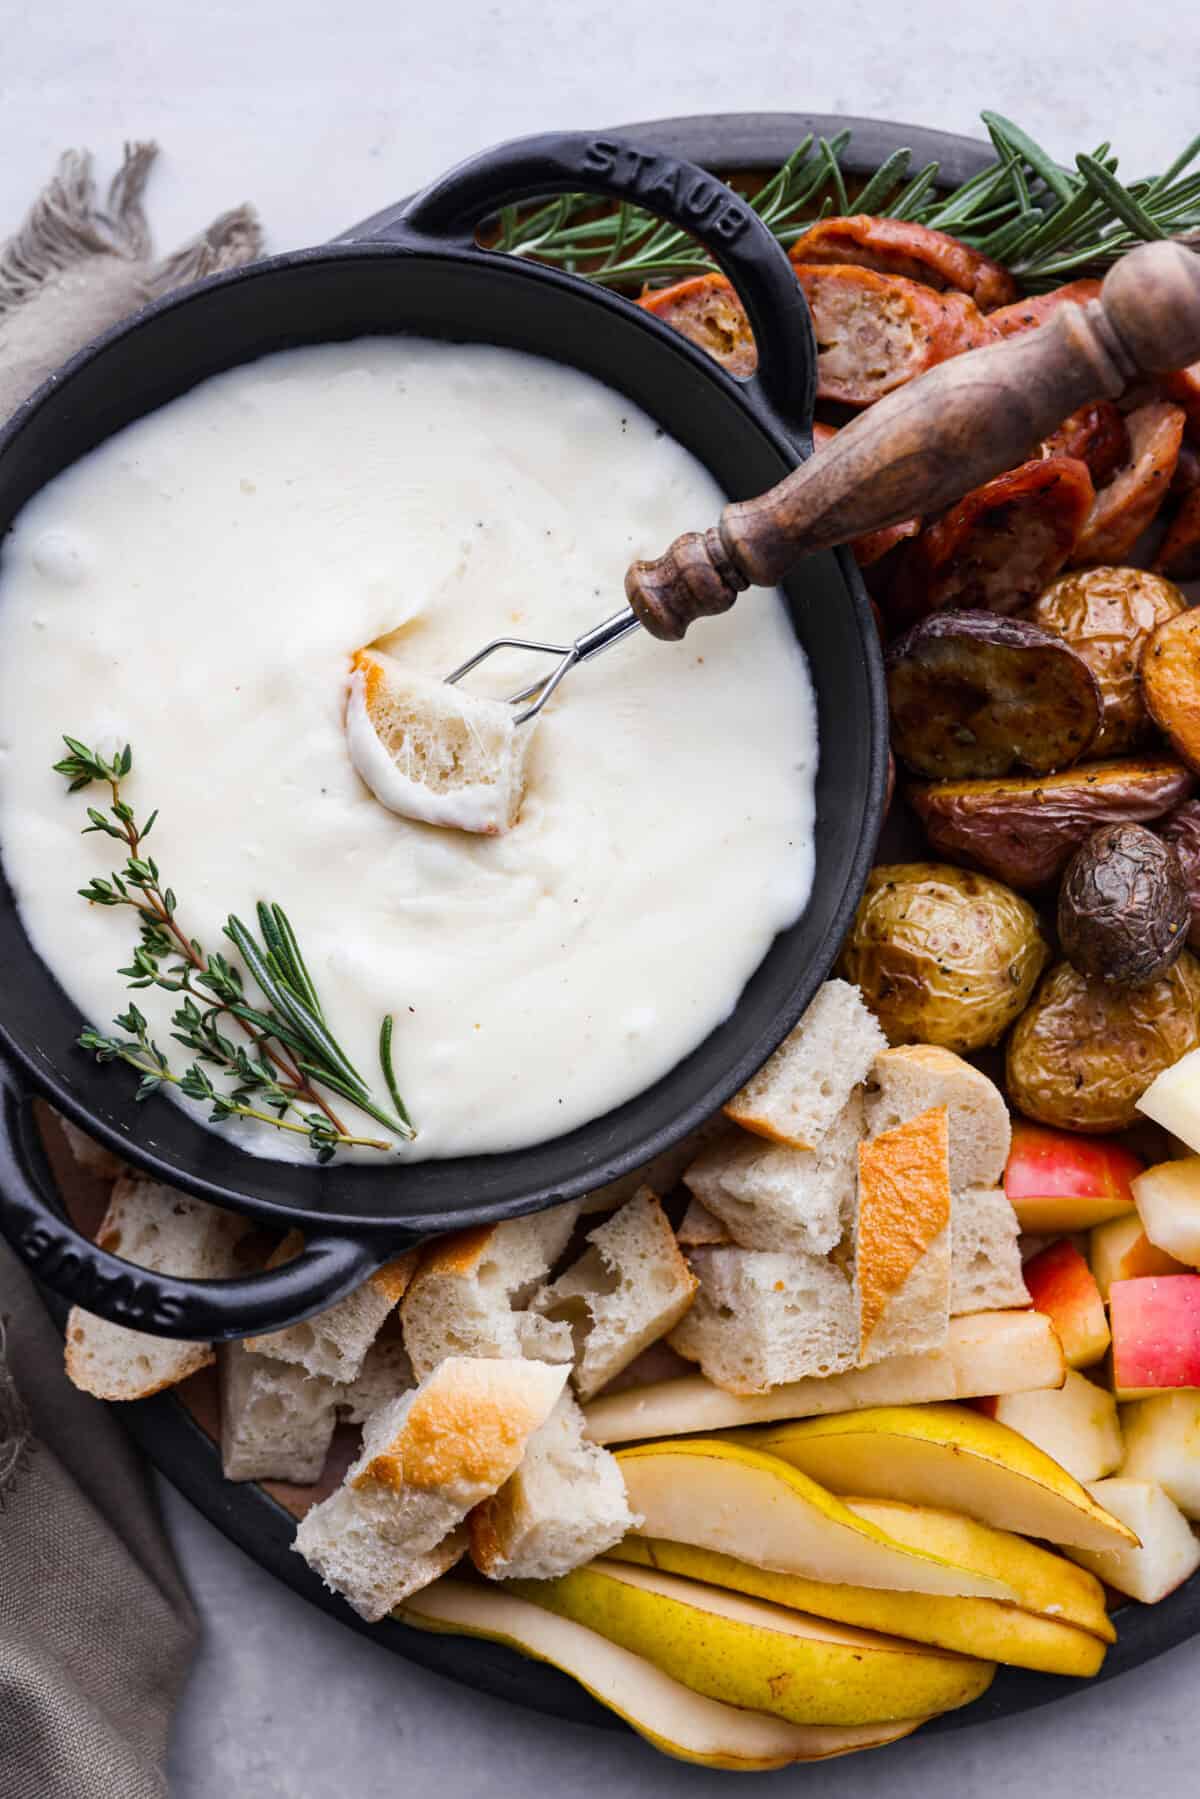 Top-down view of cheese fondue surrounded by bread, potatoes, fruit, and fresh herbs.